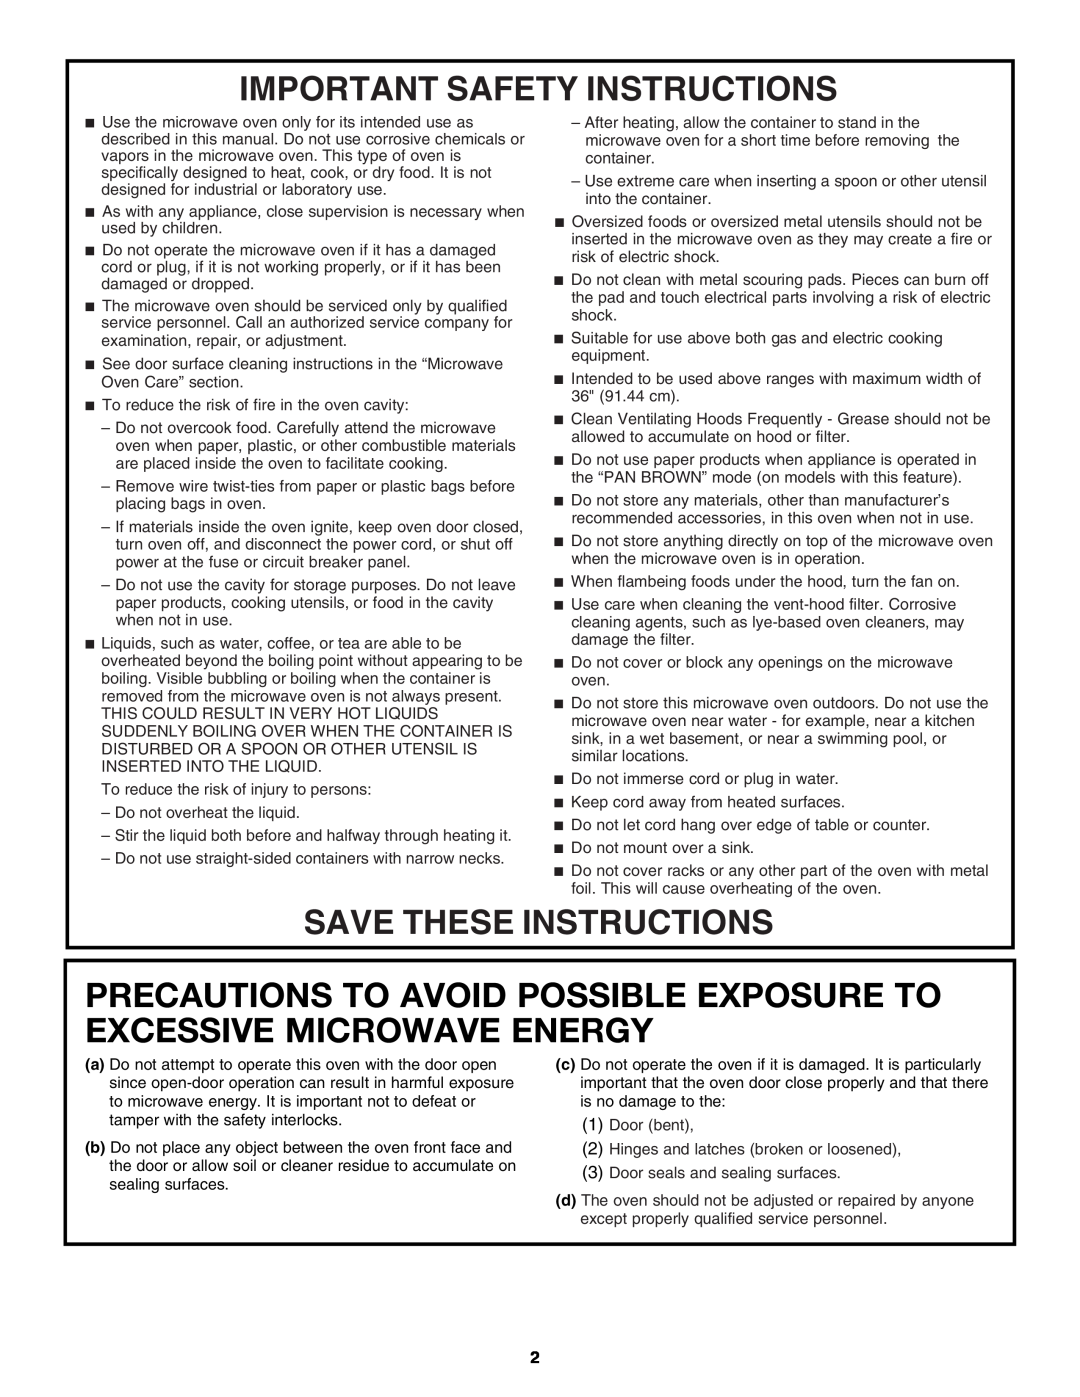 Whirlpool 461966100611 Precautions To Avoid Possible Exposure To Excessive Microwave Energy, Important Safety Instructions 